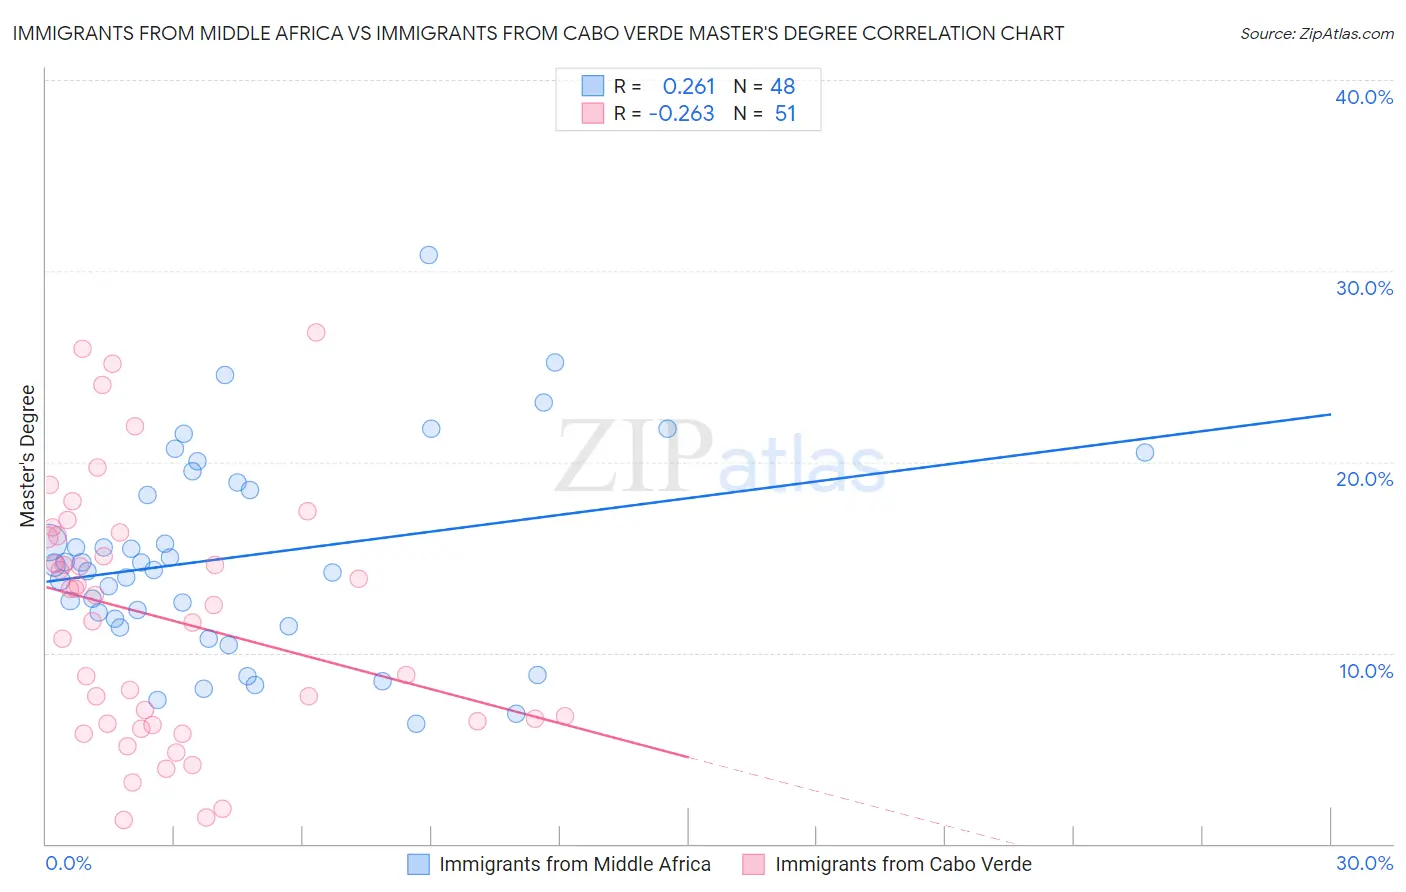 Immigrants from Middle Africa vs Immigrants from Cabo Verde Master's Degree